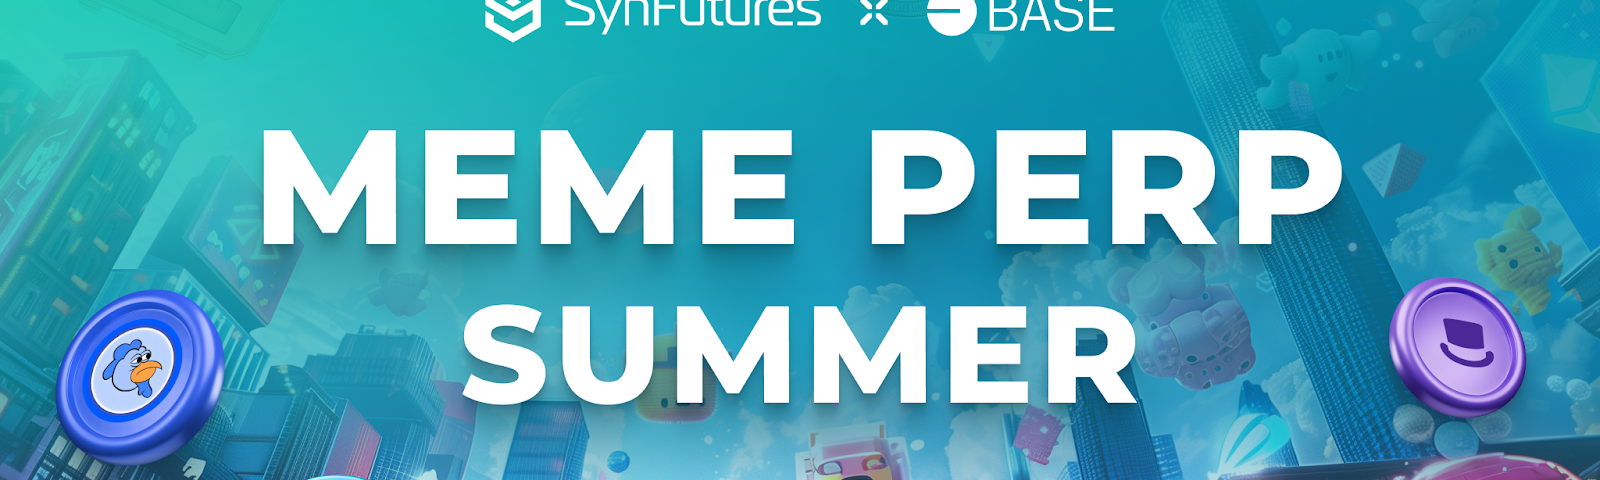 SynFutures x Base Meme Perp Summer